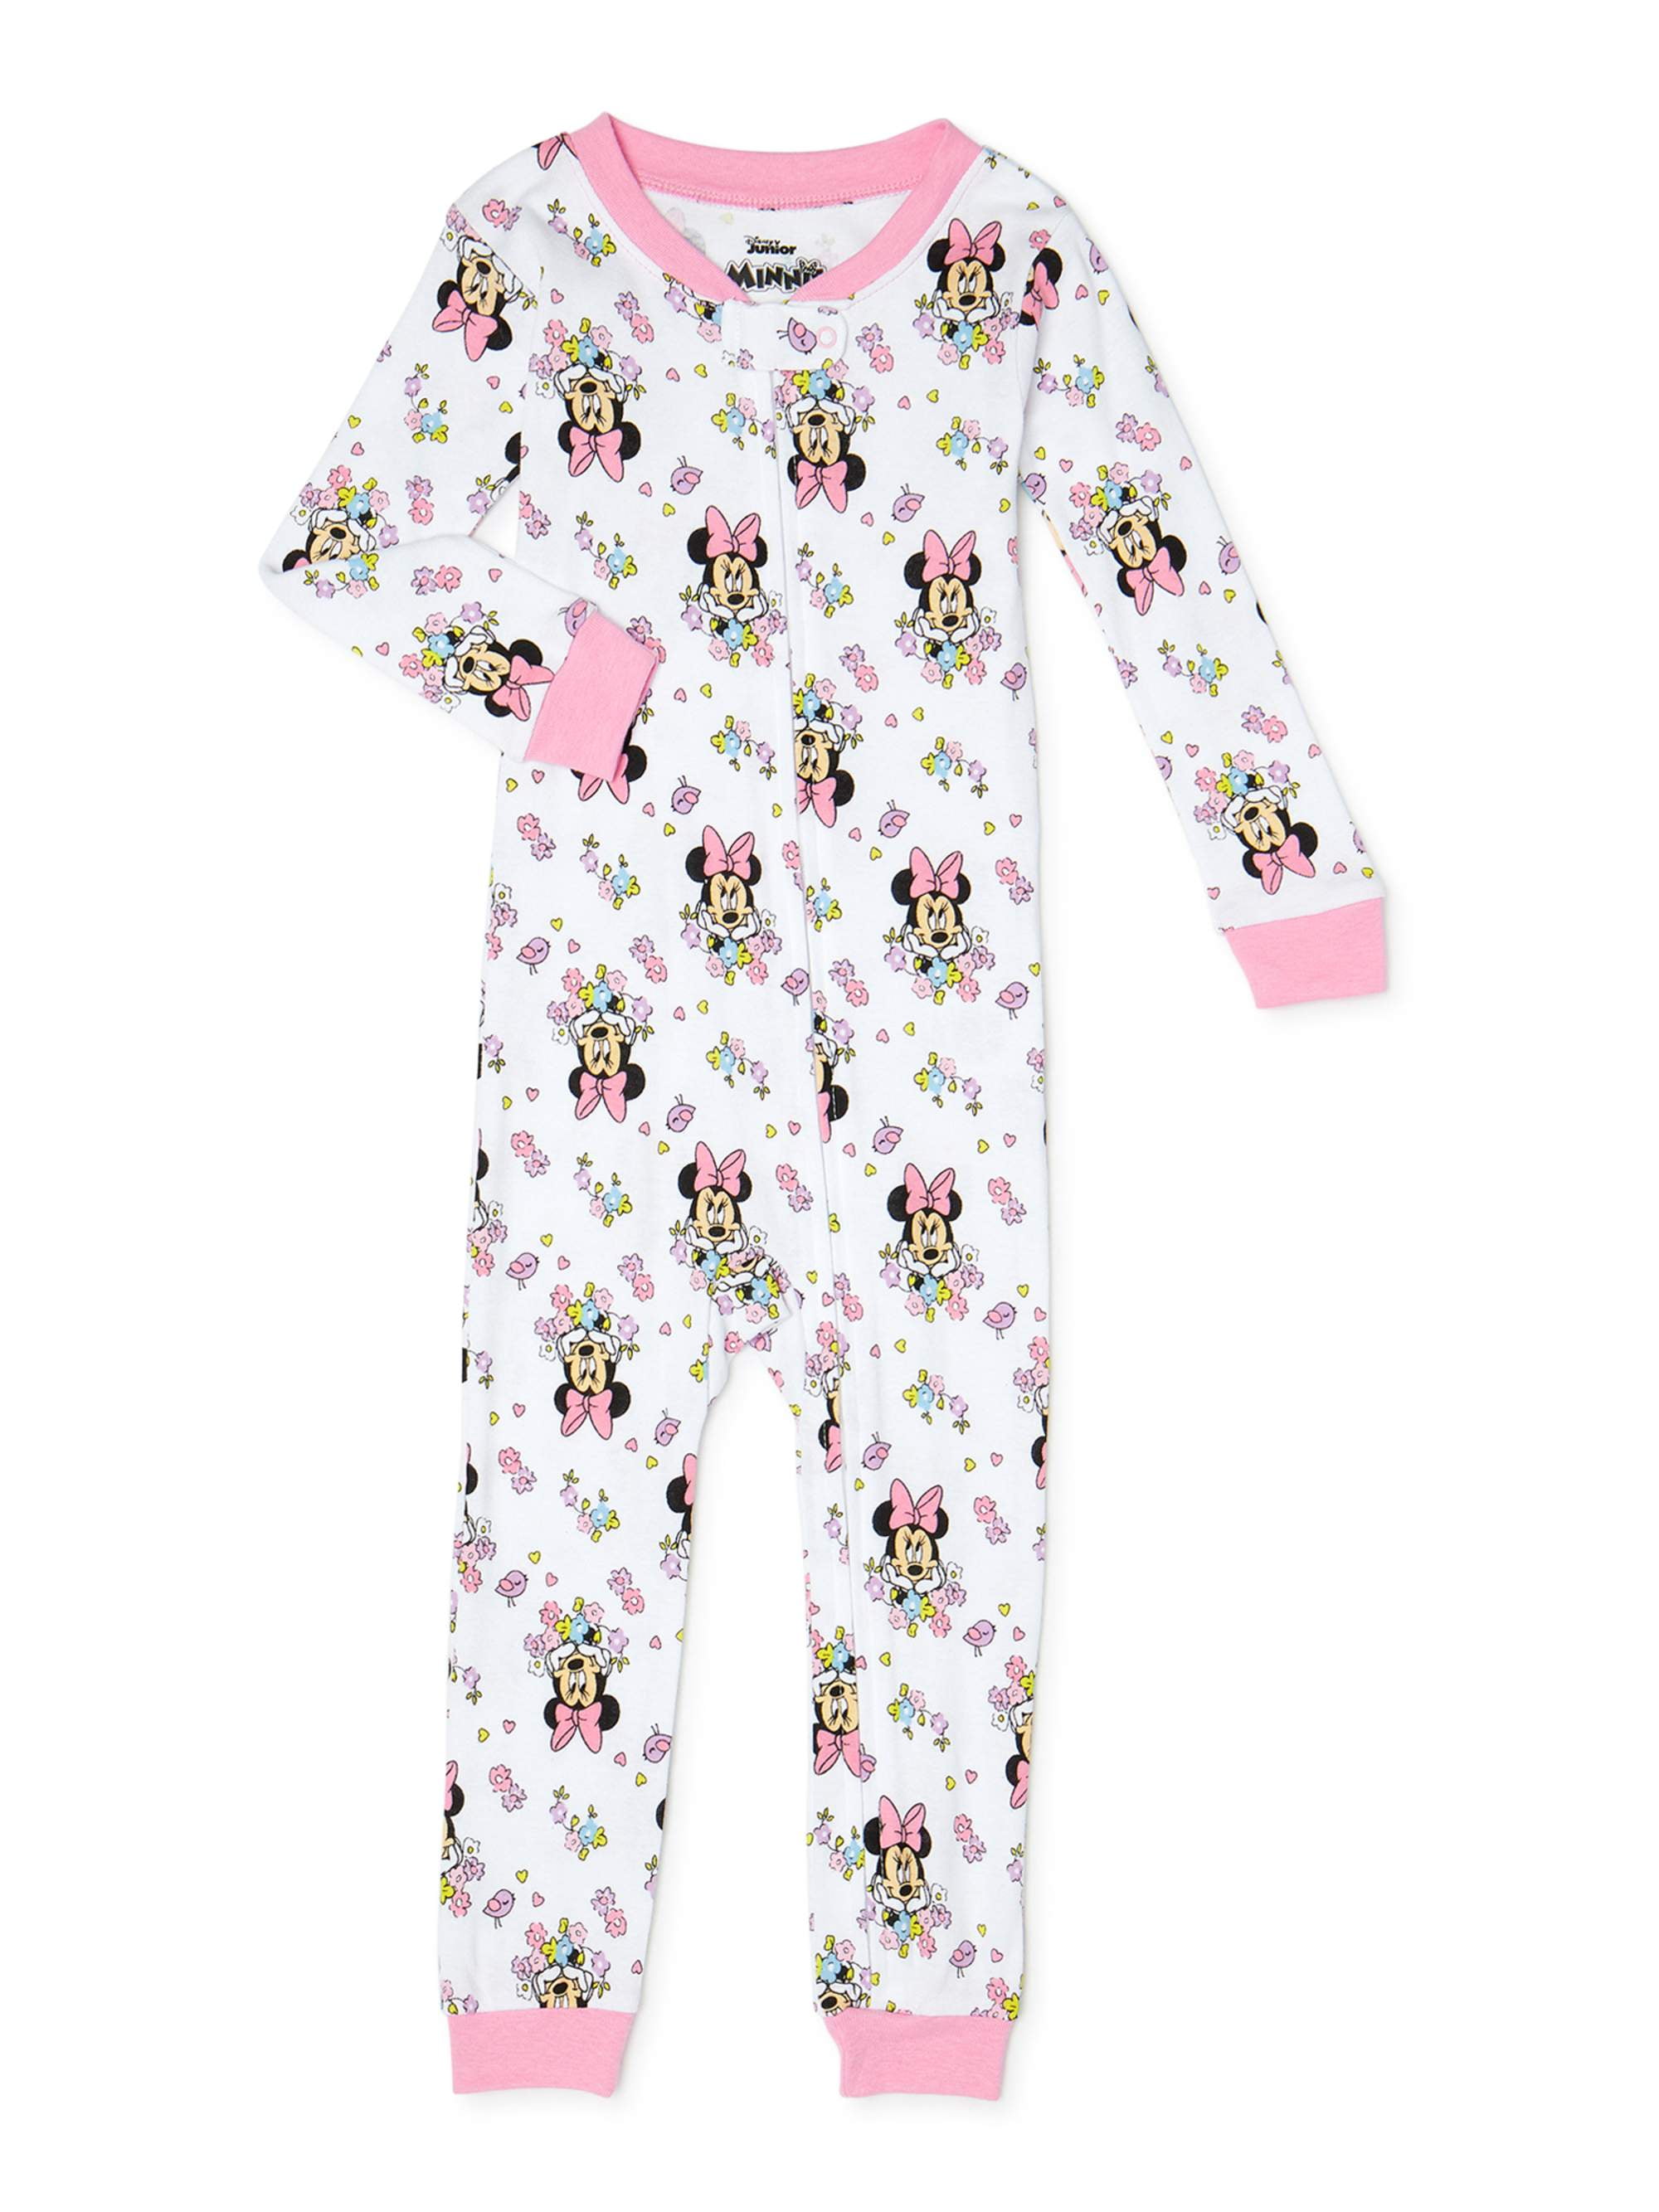 Gap Girls Minnie Mouse Fleece One Piece Footed Pajamas NWT 2 3 4 5 Years 